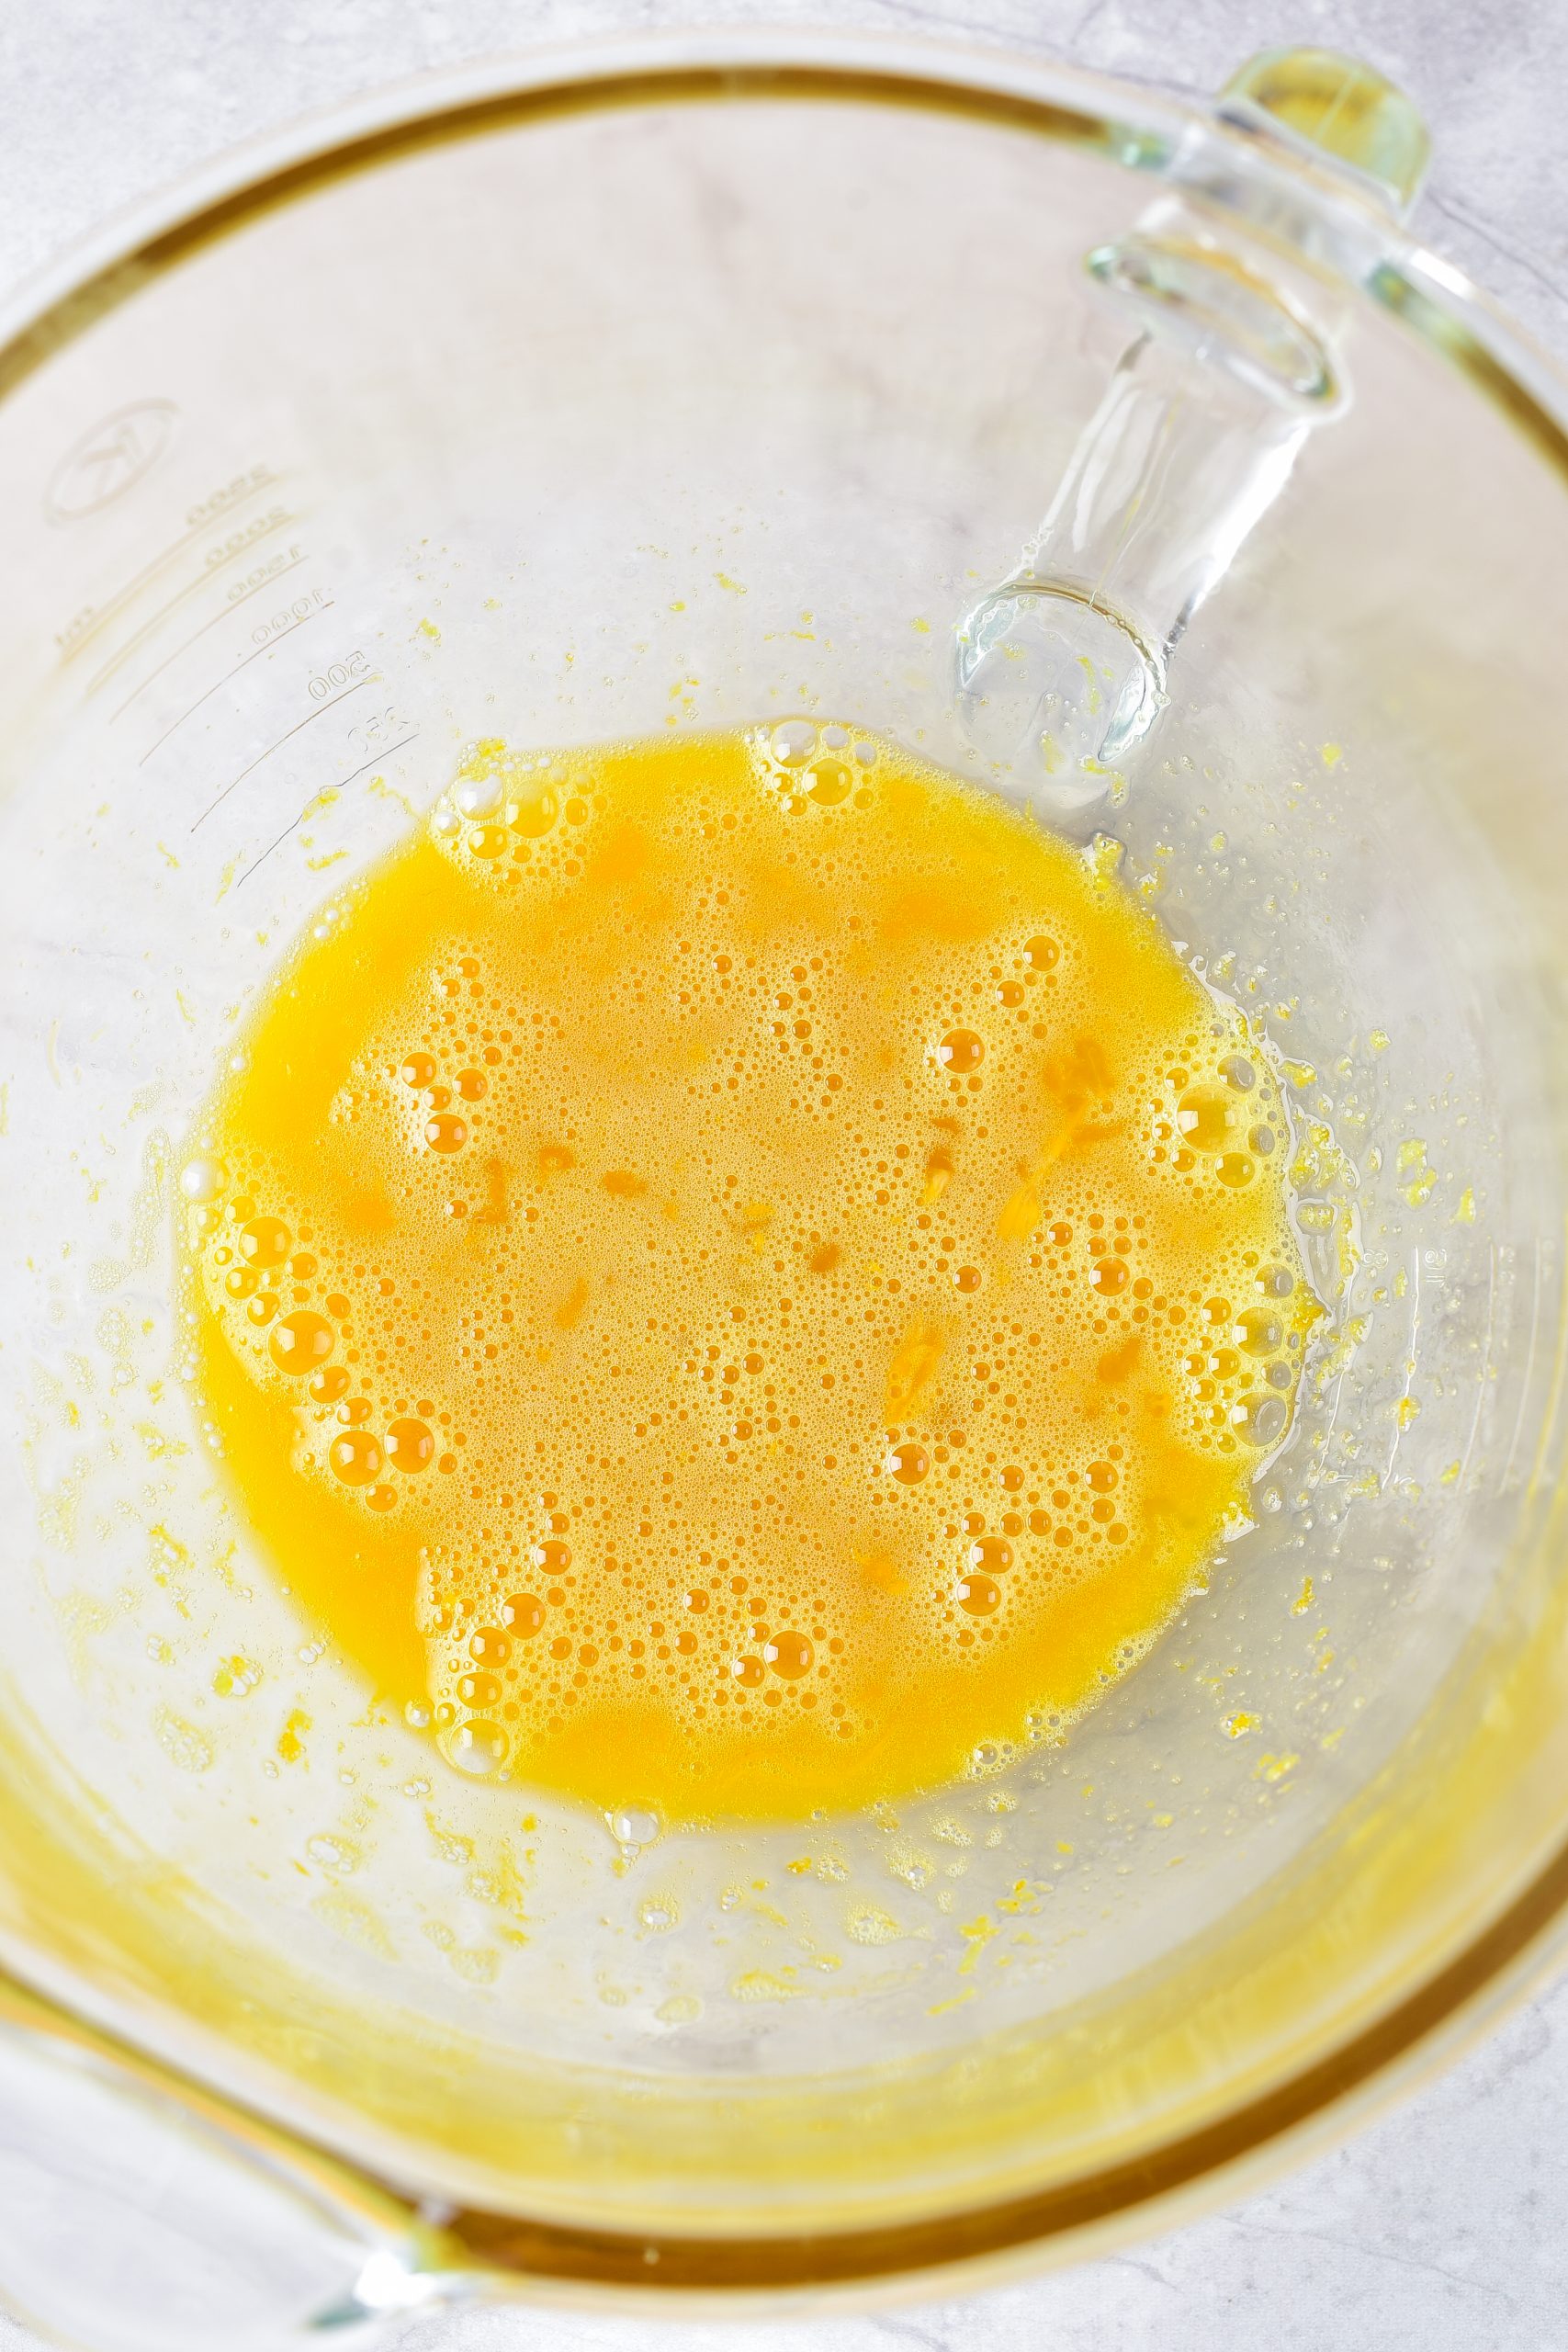 Blend together the eggs, lemon extract, and lemon zest in a separate bowl. 